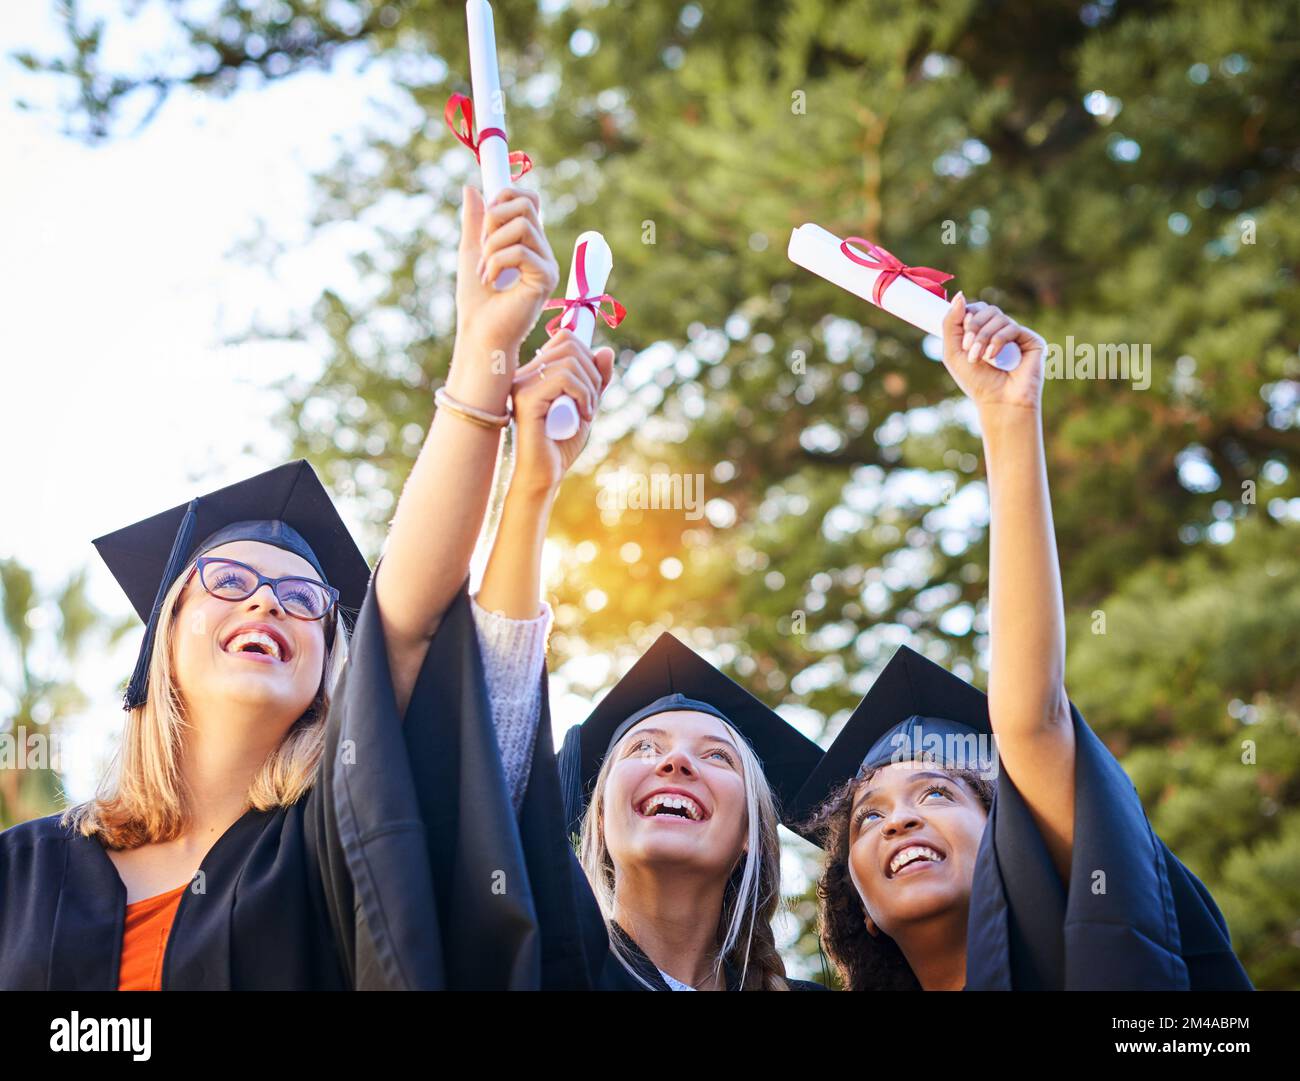 No more assignments or tests. a group of graduates holding their diplomas up in the air. Stock Photo